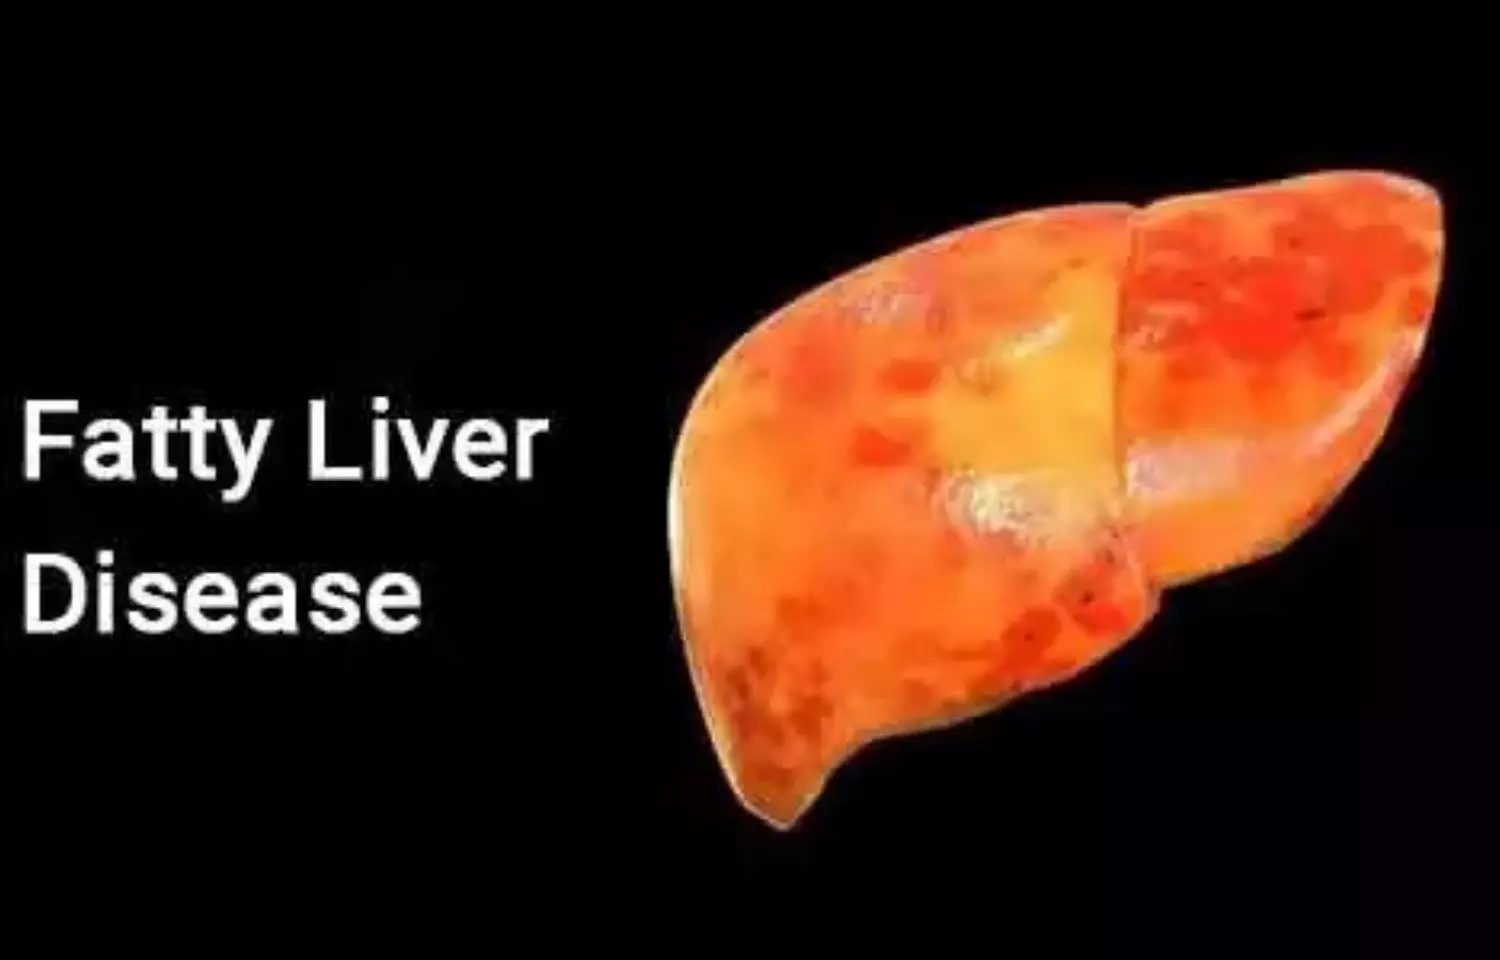 New PET imaging-based tool detects liver inflammation from fatty liver disease